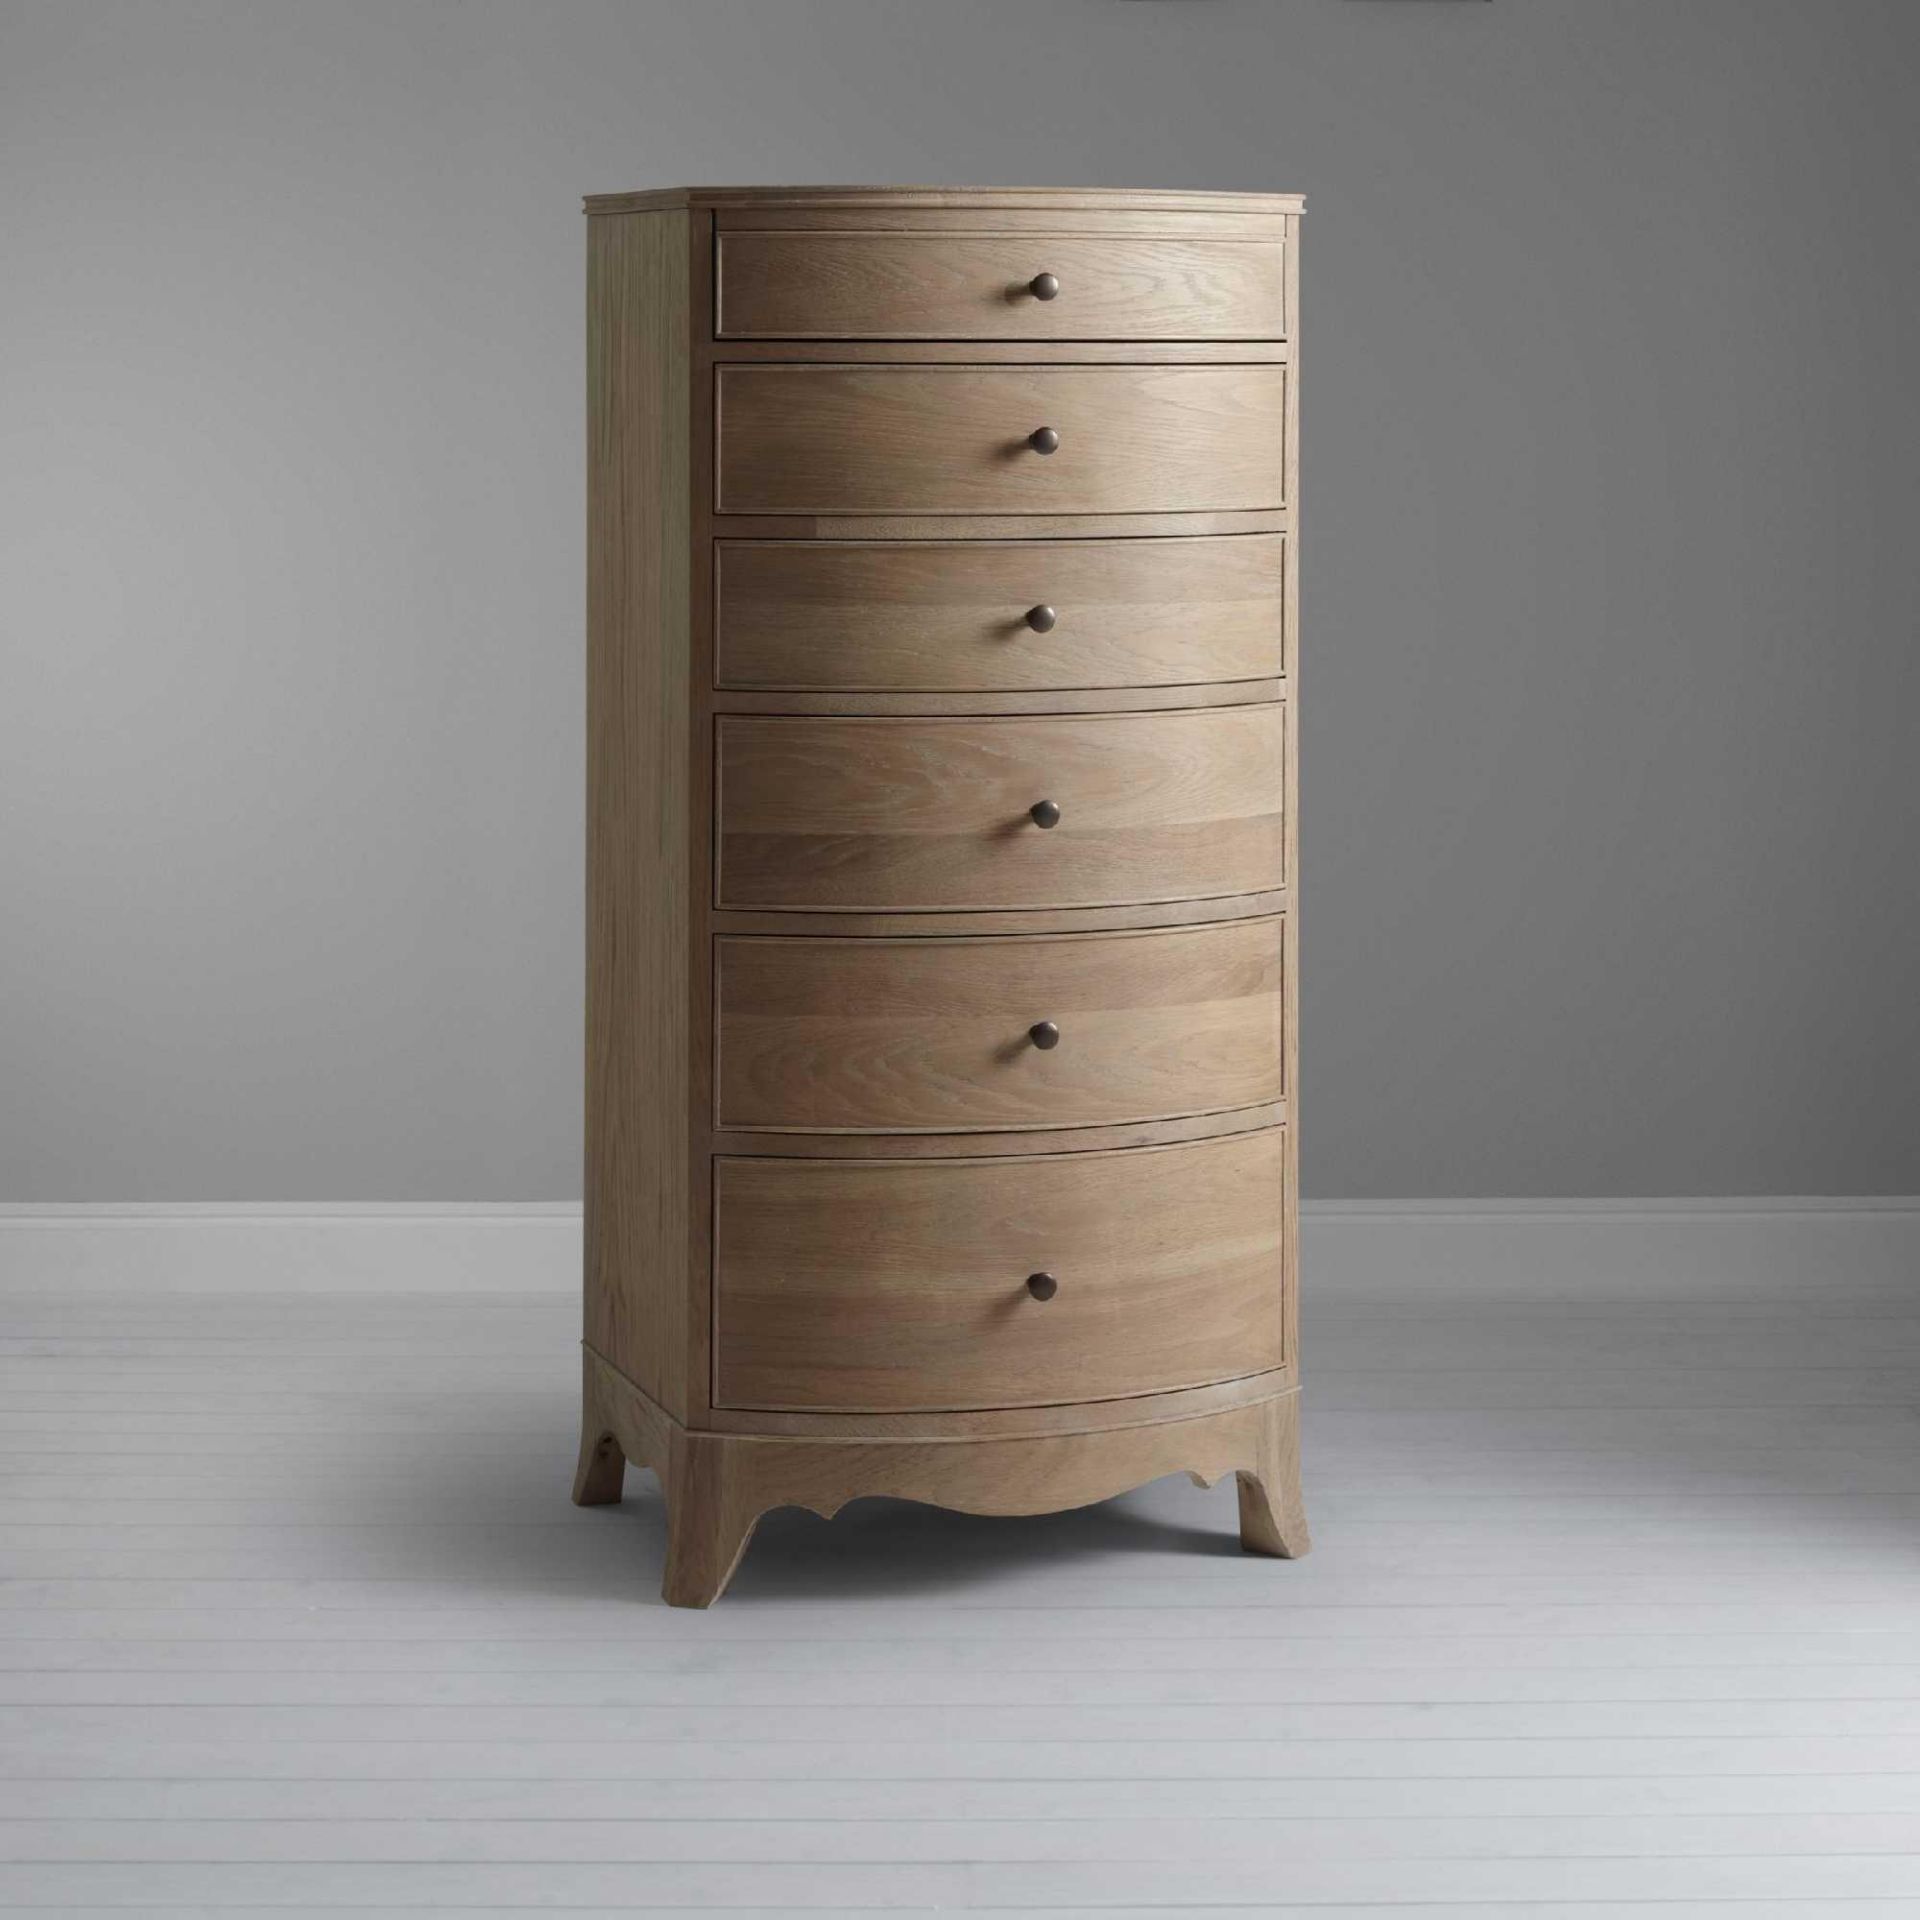 RRP £650 Lot To Contain X1- Unboxed John Lewis & Partners Etienne 5 Drawer Tall Mirror Chest, Oak (K